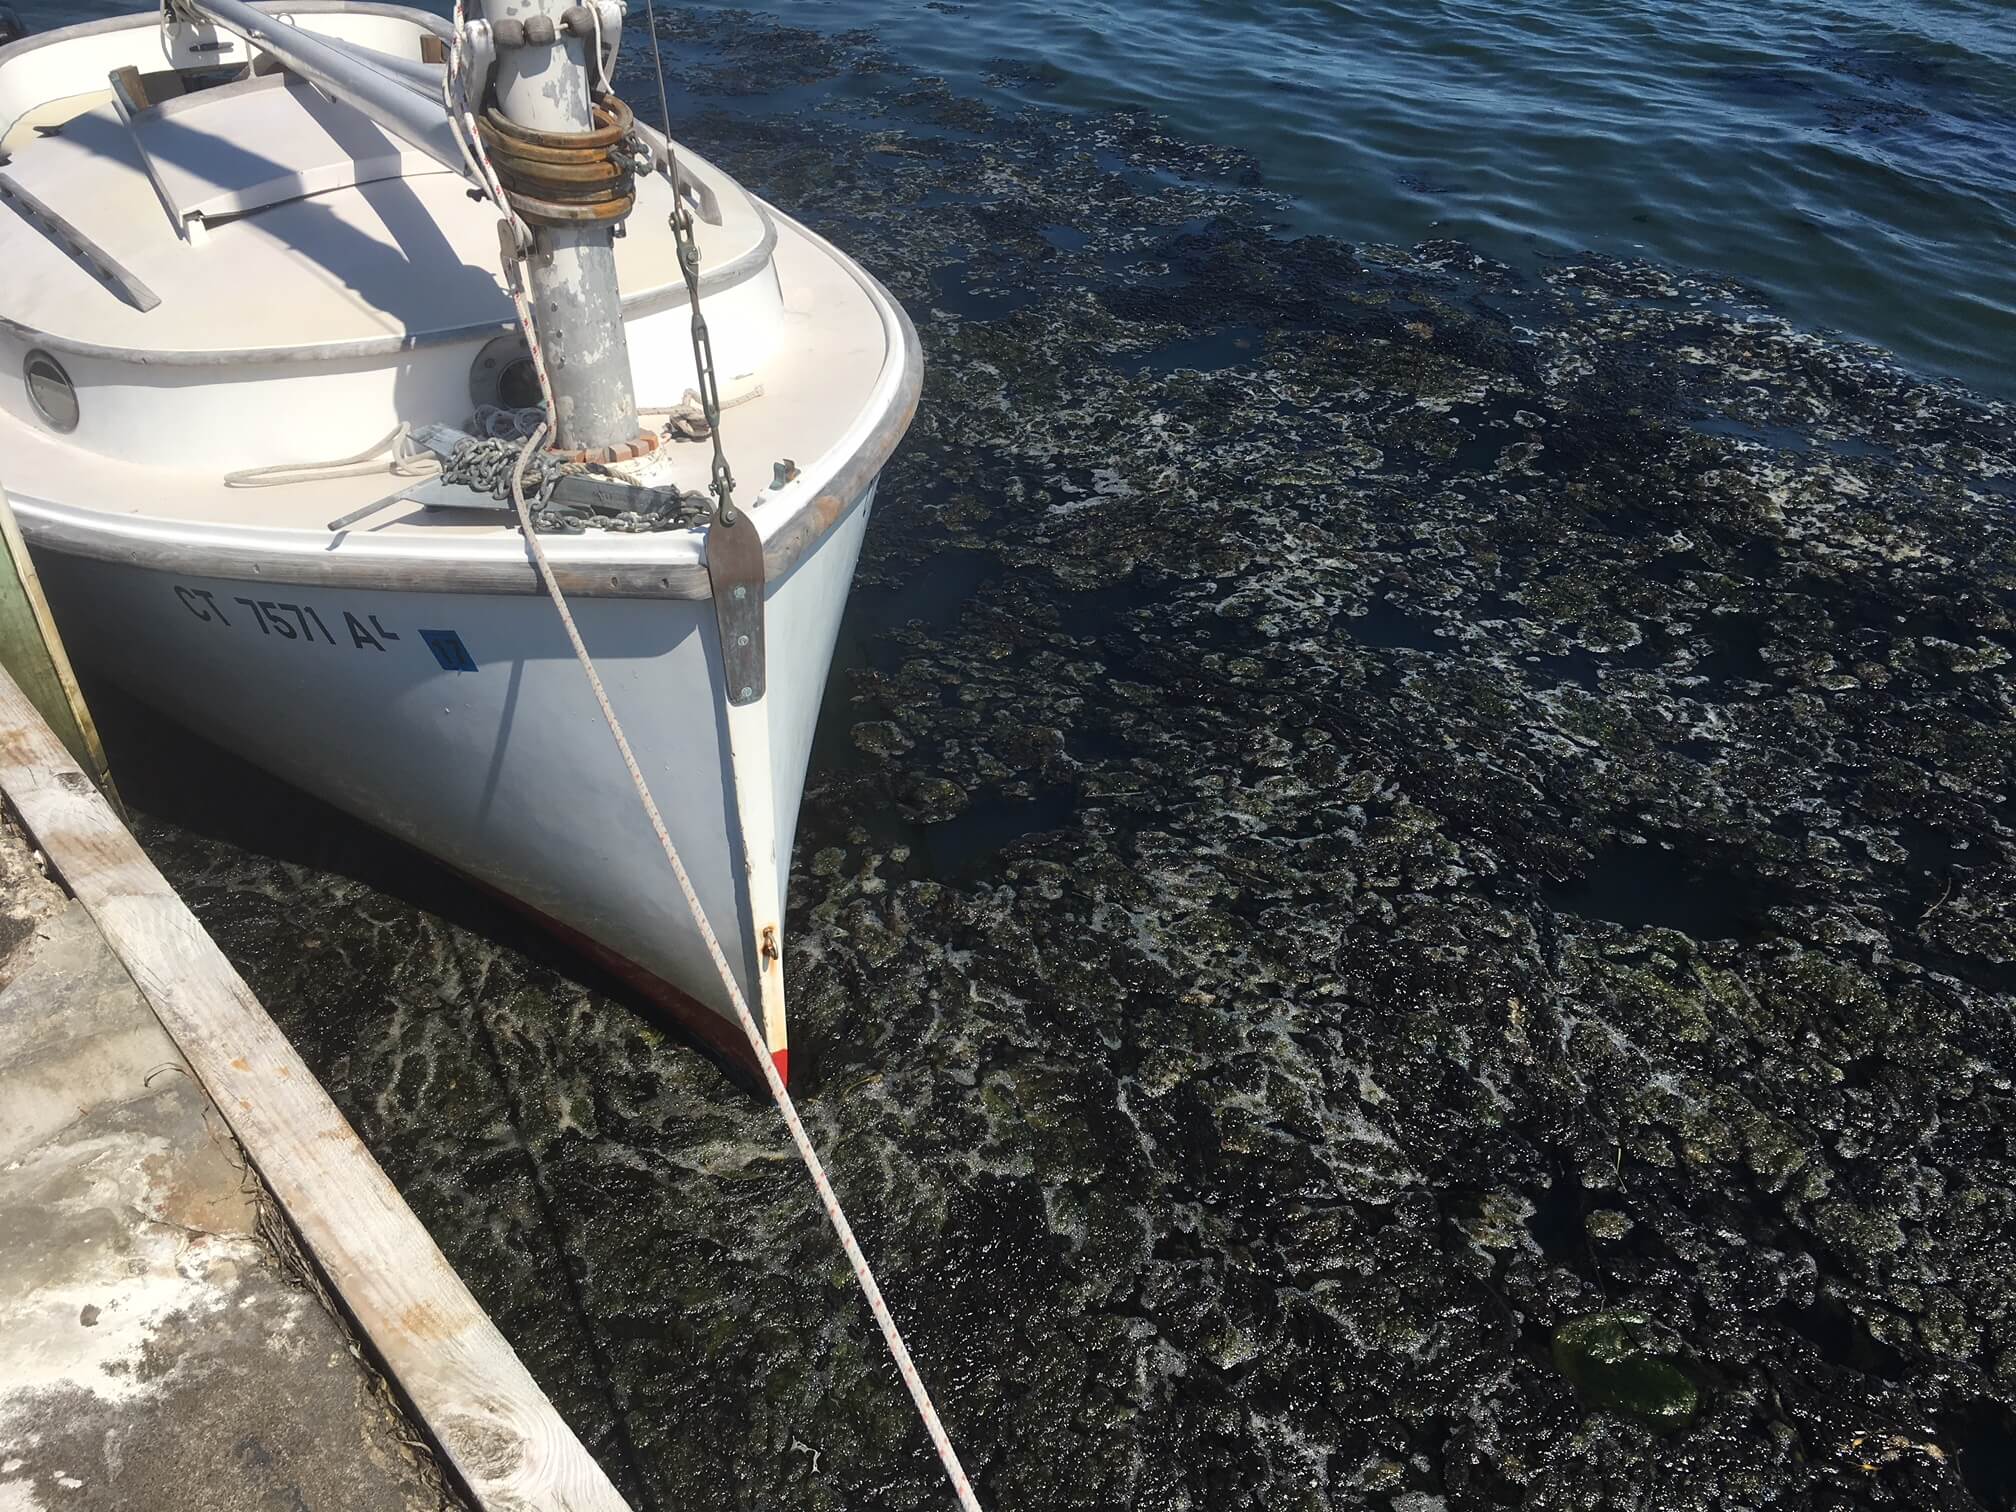 Nuisance Algae © Clean Up Sounds and Harbors